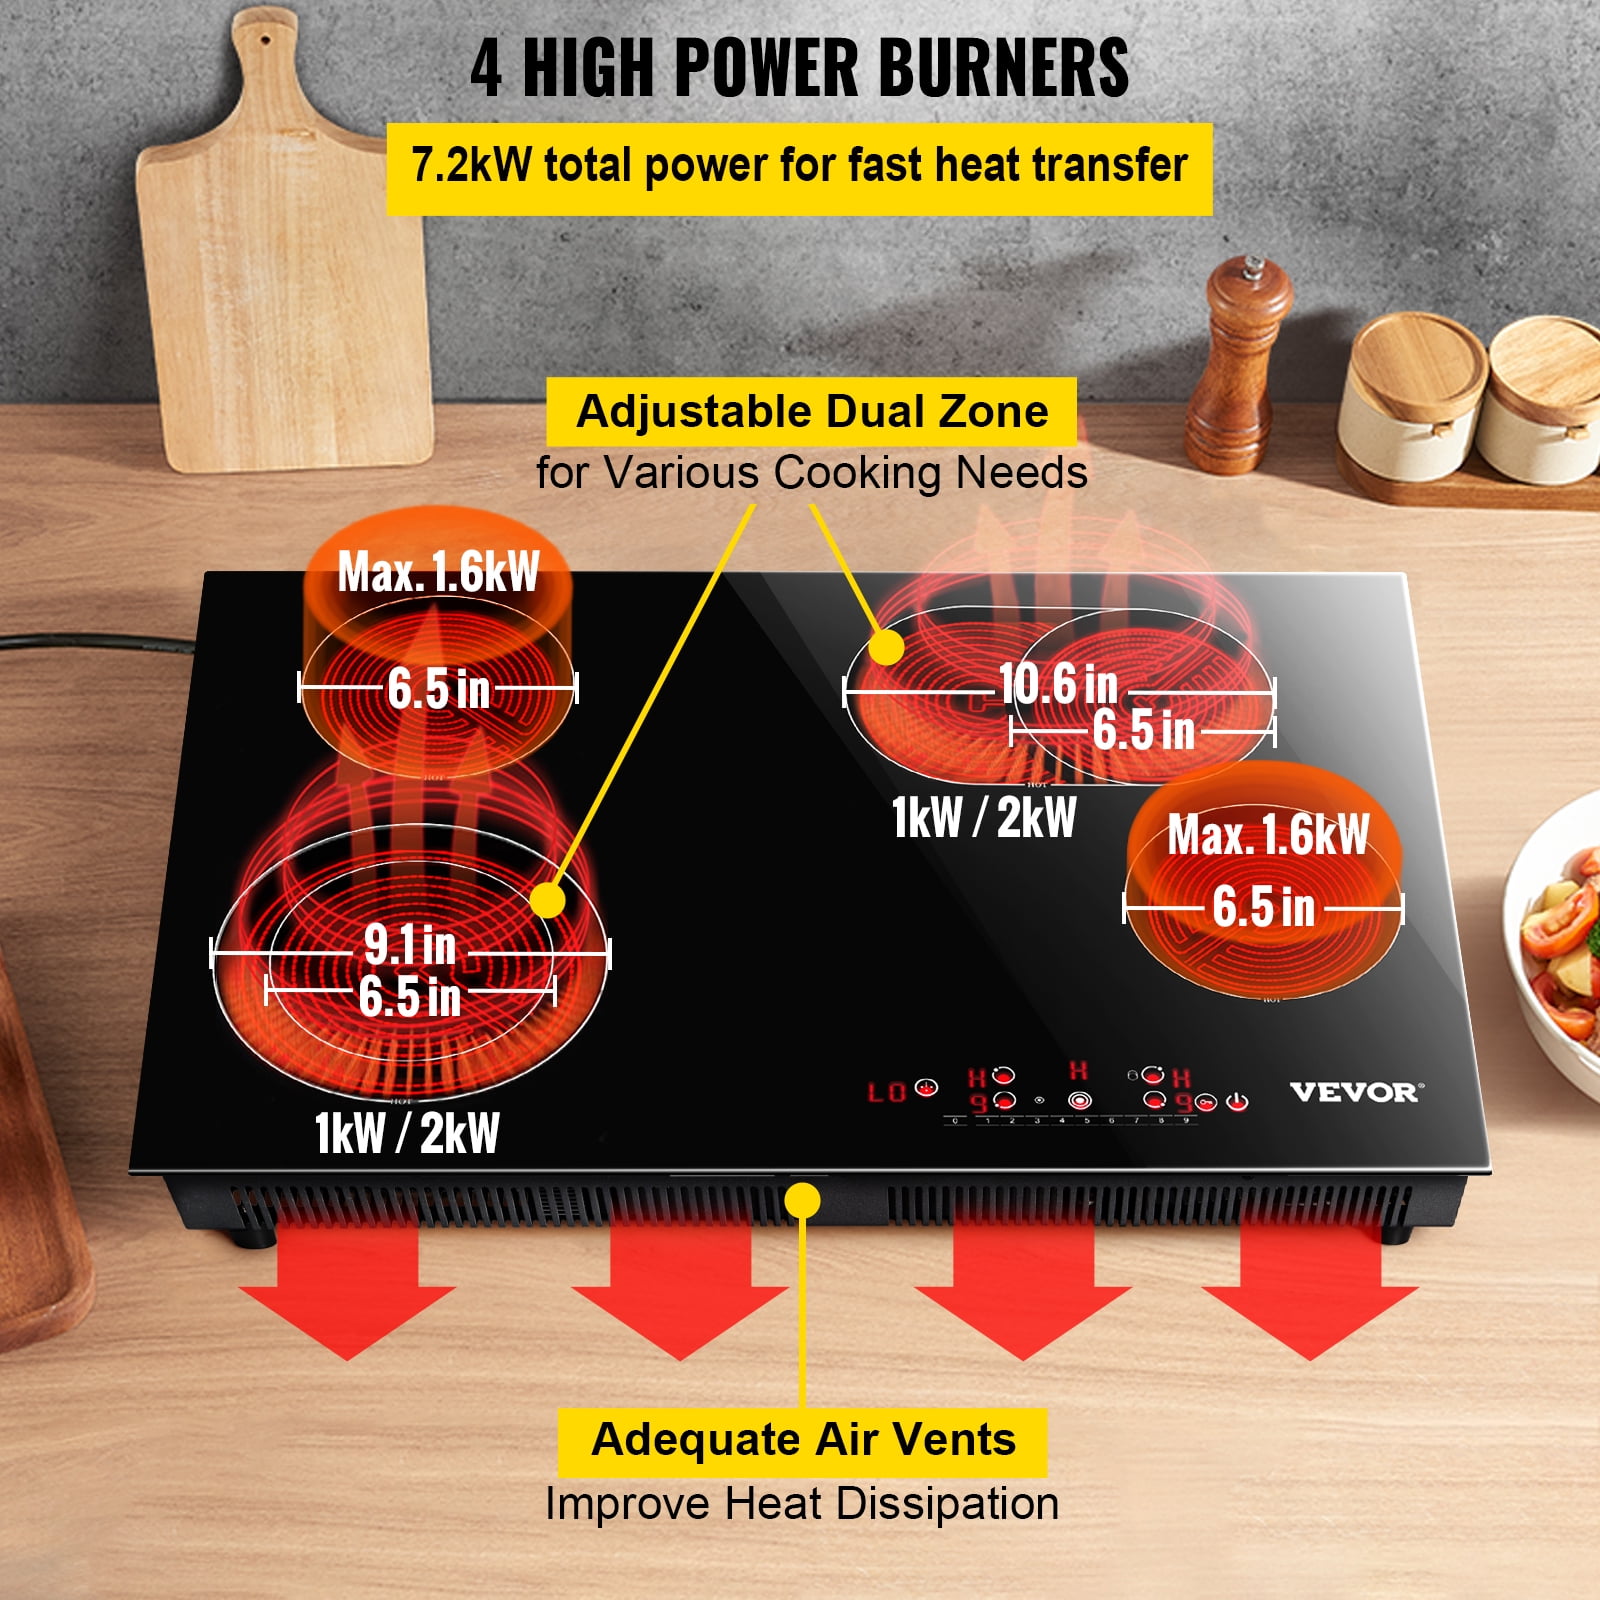 VEVOR Built in Electric Stove Top 30 in. 4 Burners Glass Radiant Cooktop  with Sensor Touch Control, Timer and Child Lock,Black Q30INCH7200W4GOHKV4 -  The Home Depot